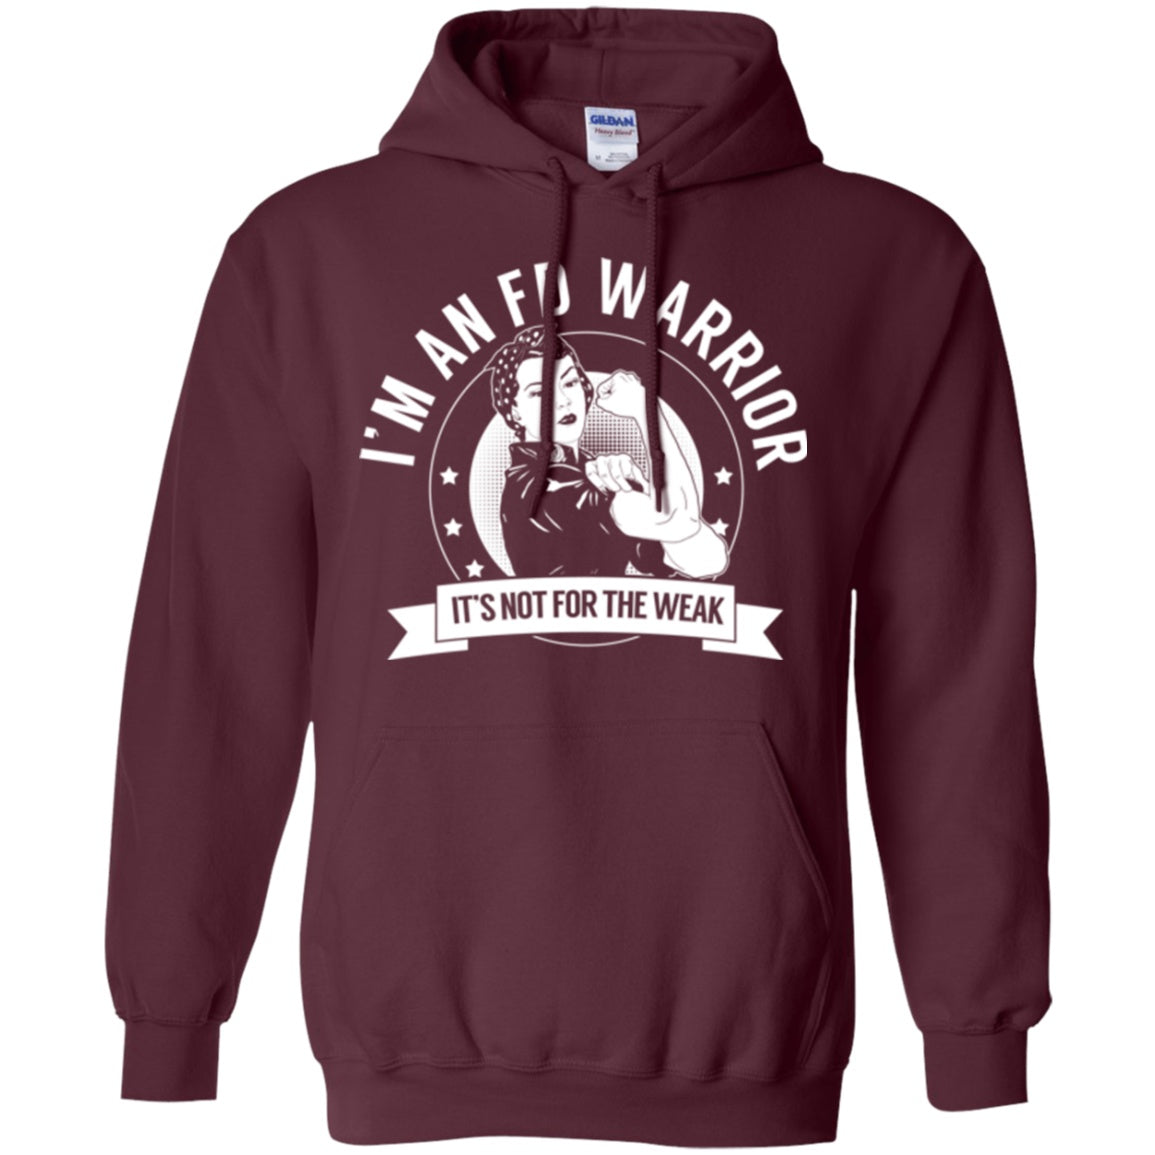 Fibrous Dysplasia - FD Warrior Not For The Weak Pullover Hoodie 8 oz. - The Unchargeables